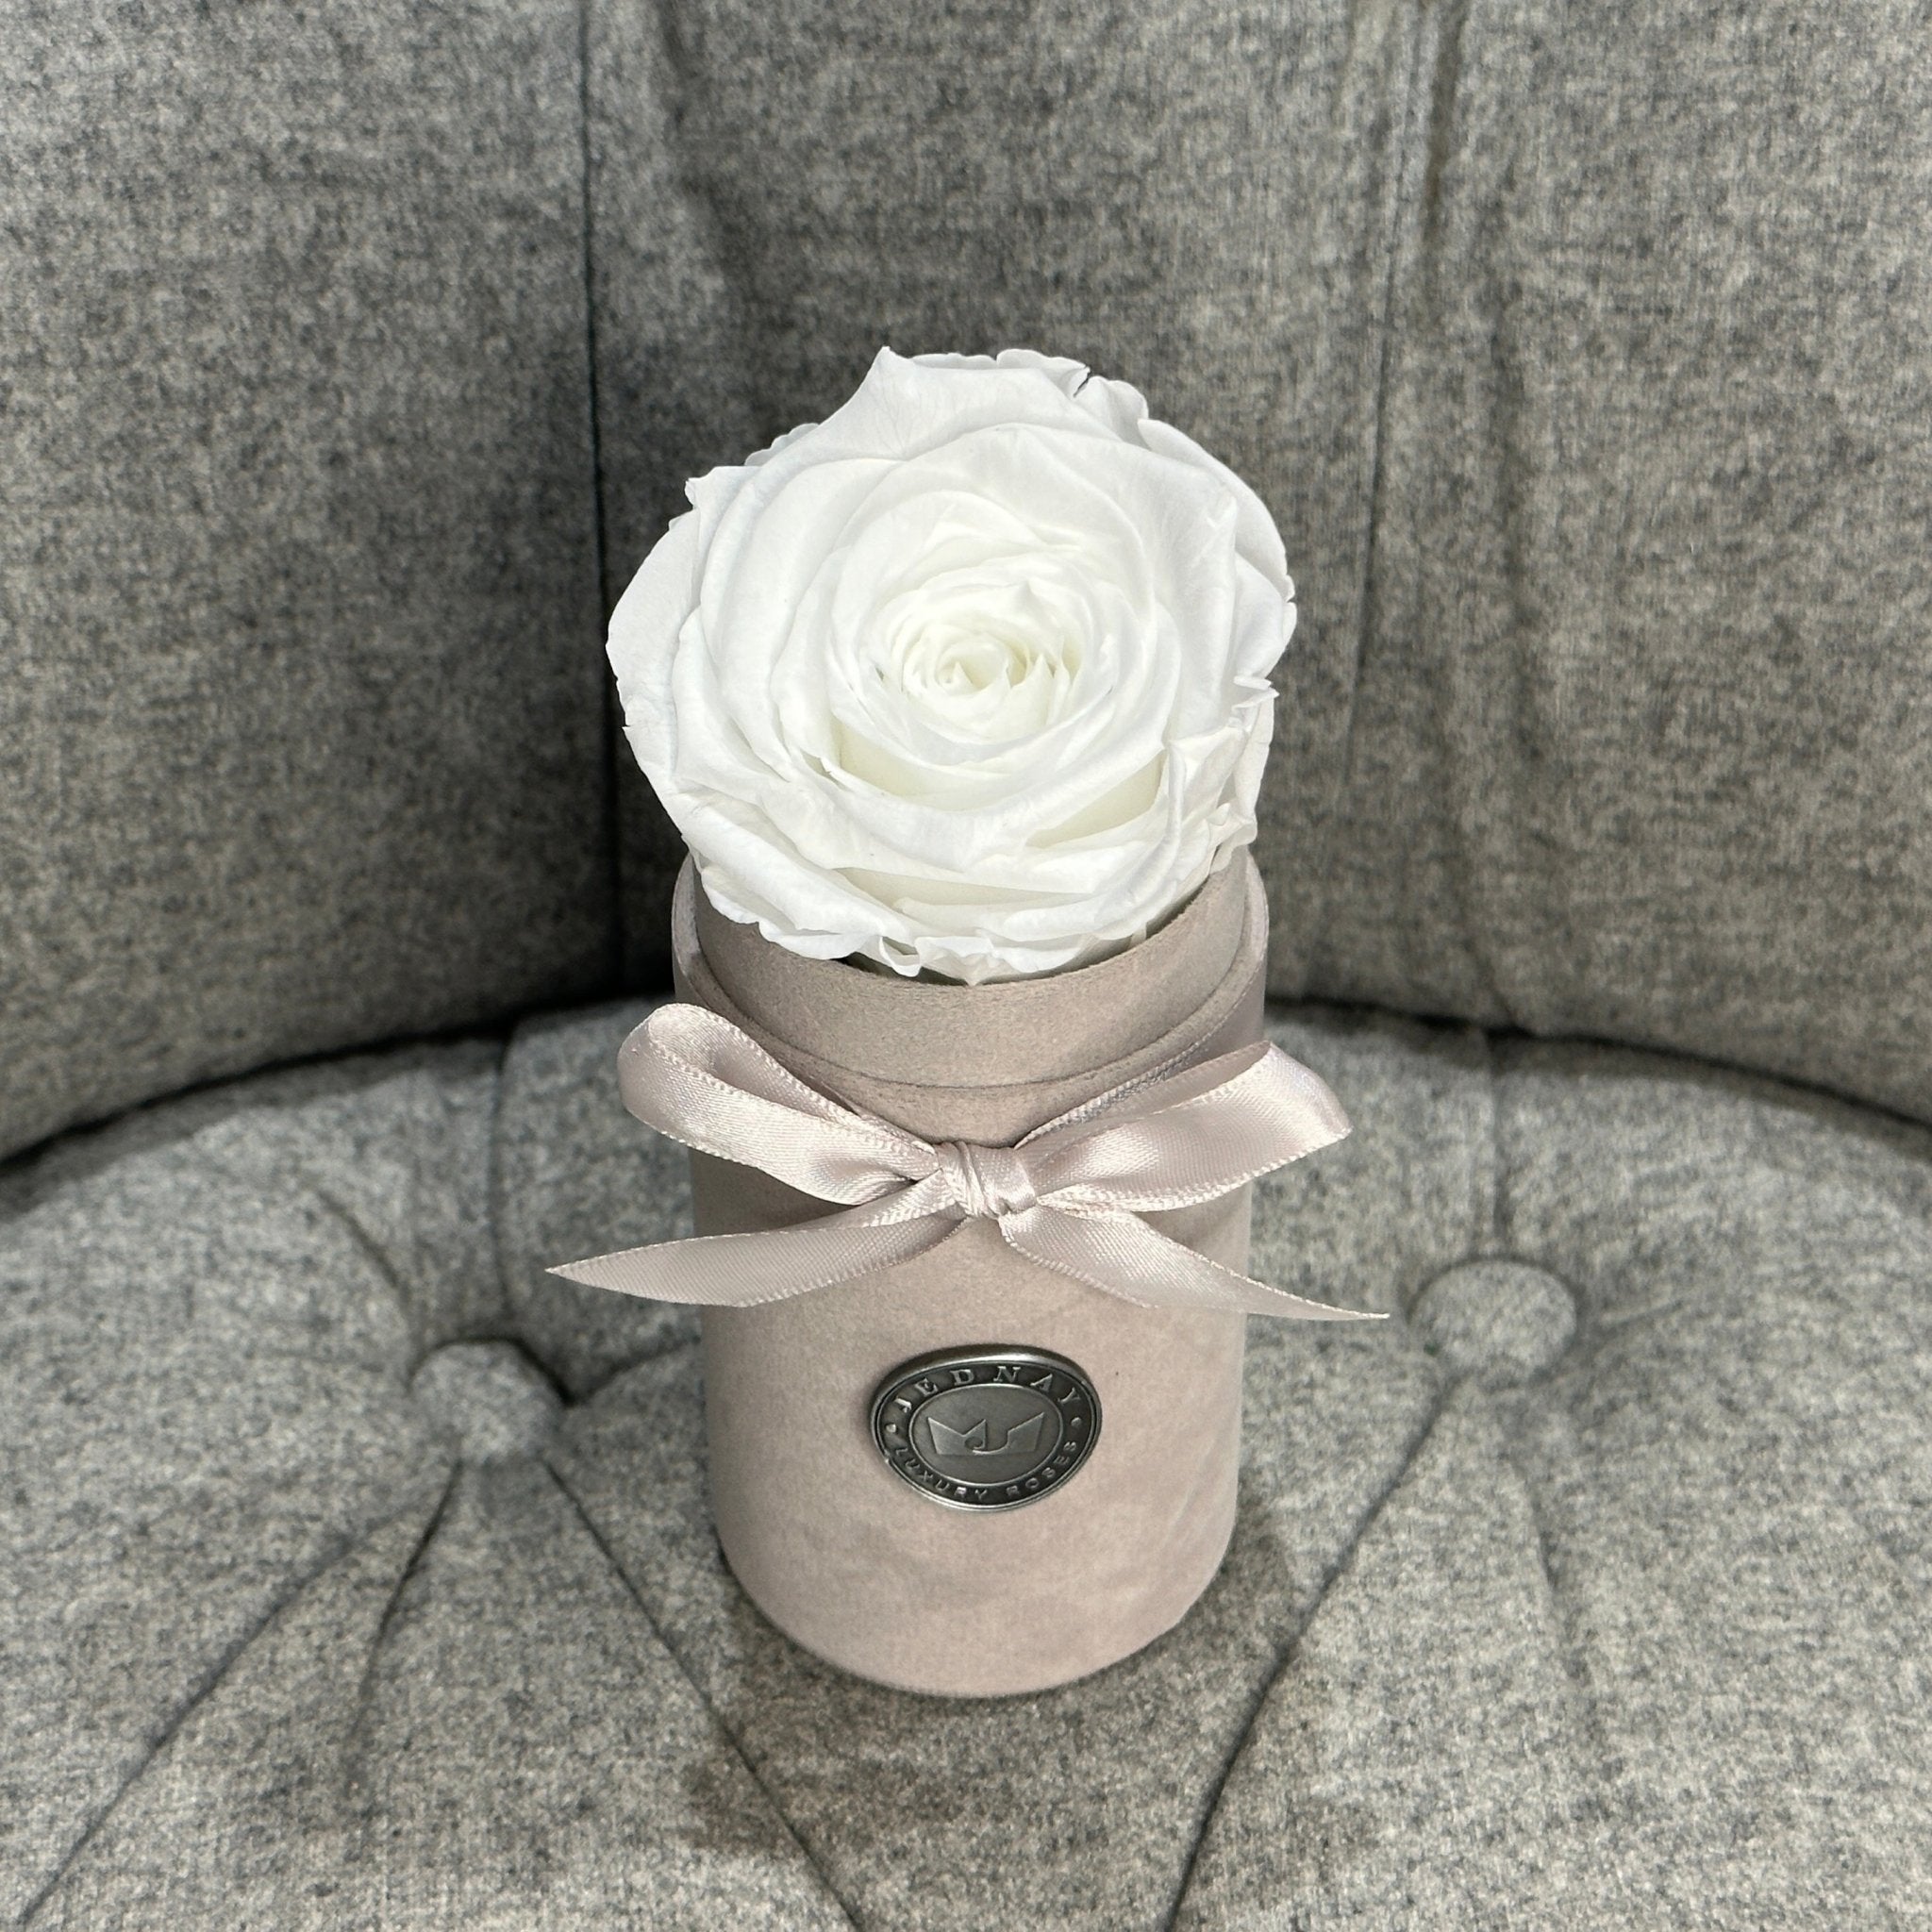 Single Grey Suede Forever Rose Box - Angel White Eternal Rose - Jednay Roses